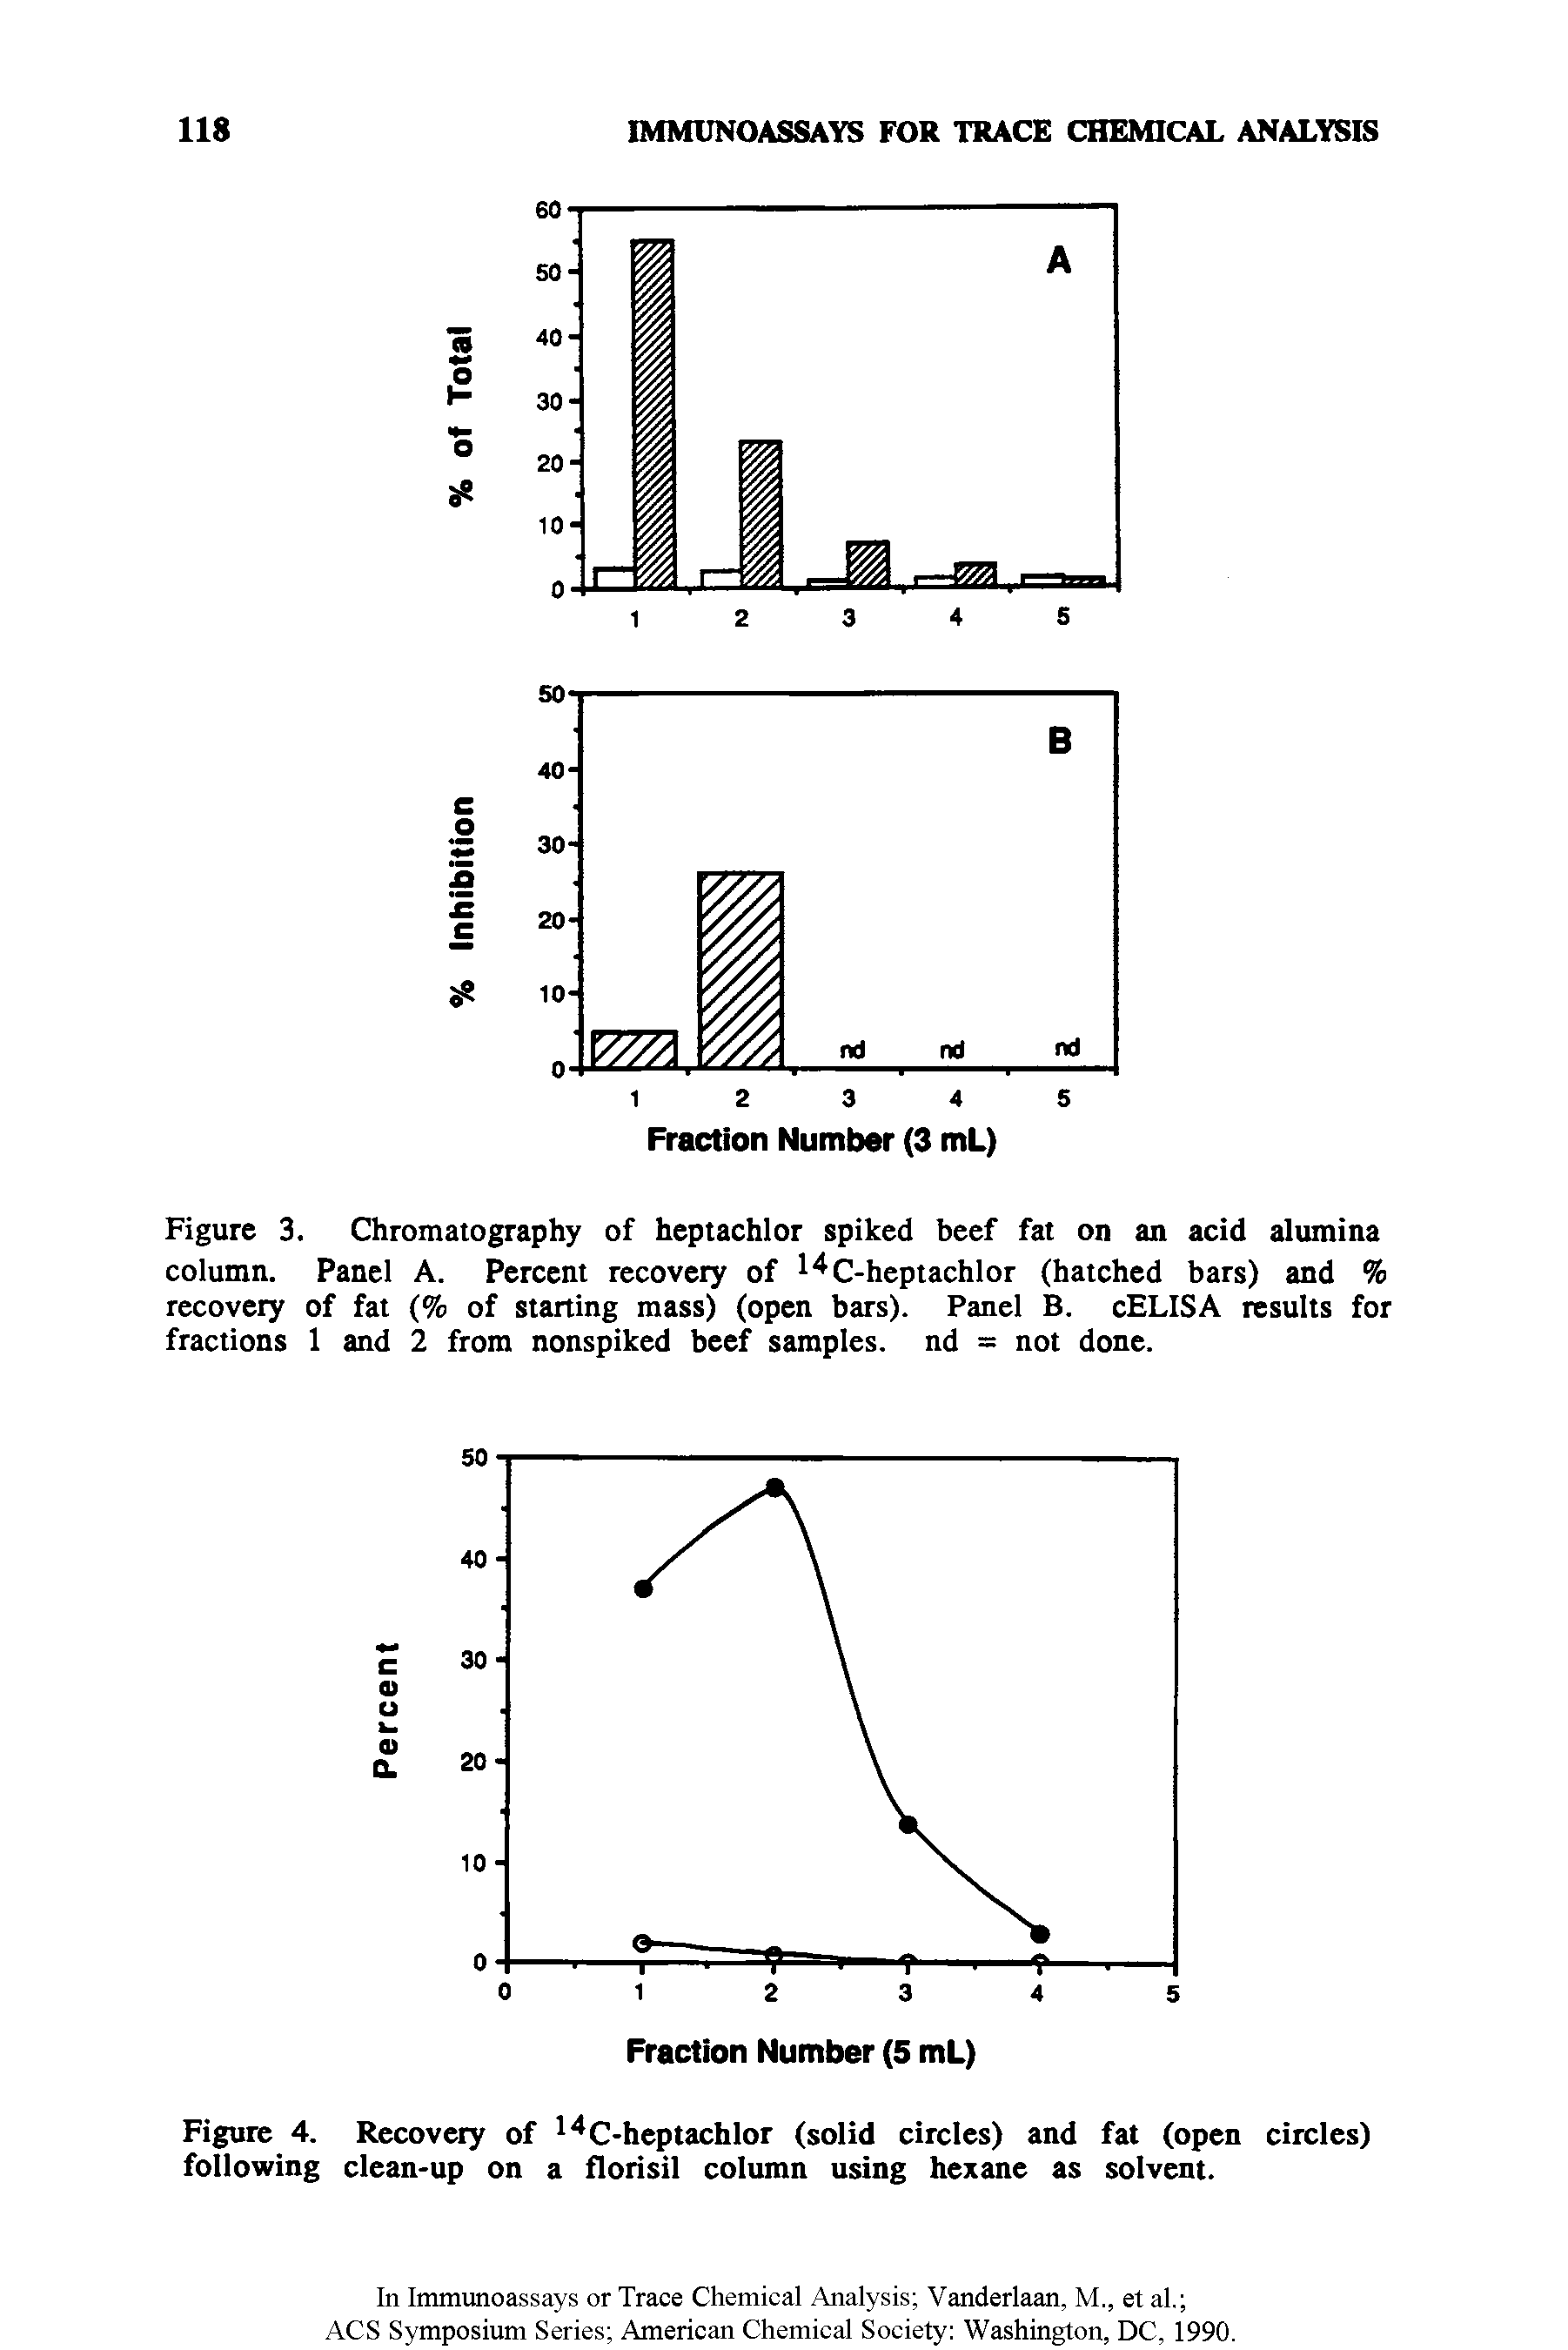 Figure 3. Chromatography of heptachlor spiked beef fat on an acid alumina column. Panel A. Percent recovery of l C-heptachlor (hatched bars) and % recovery of fat (% of starting mass) (open bars). Panel B. cELISA results for fractions 1 and 2 from nonspiked beef samples, nd = not done.